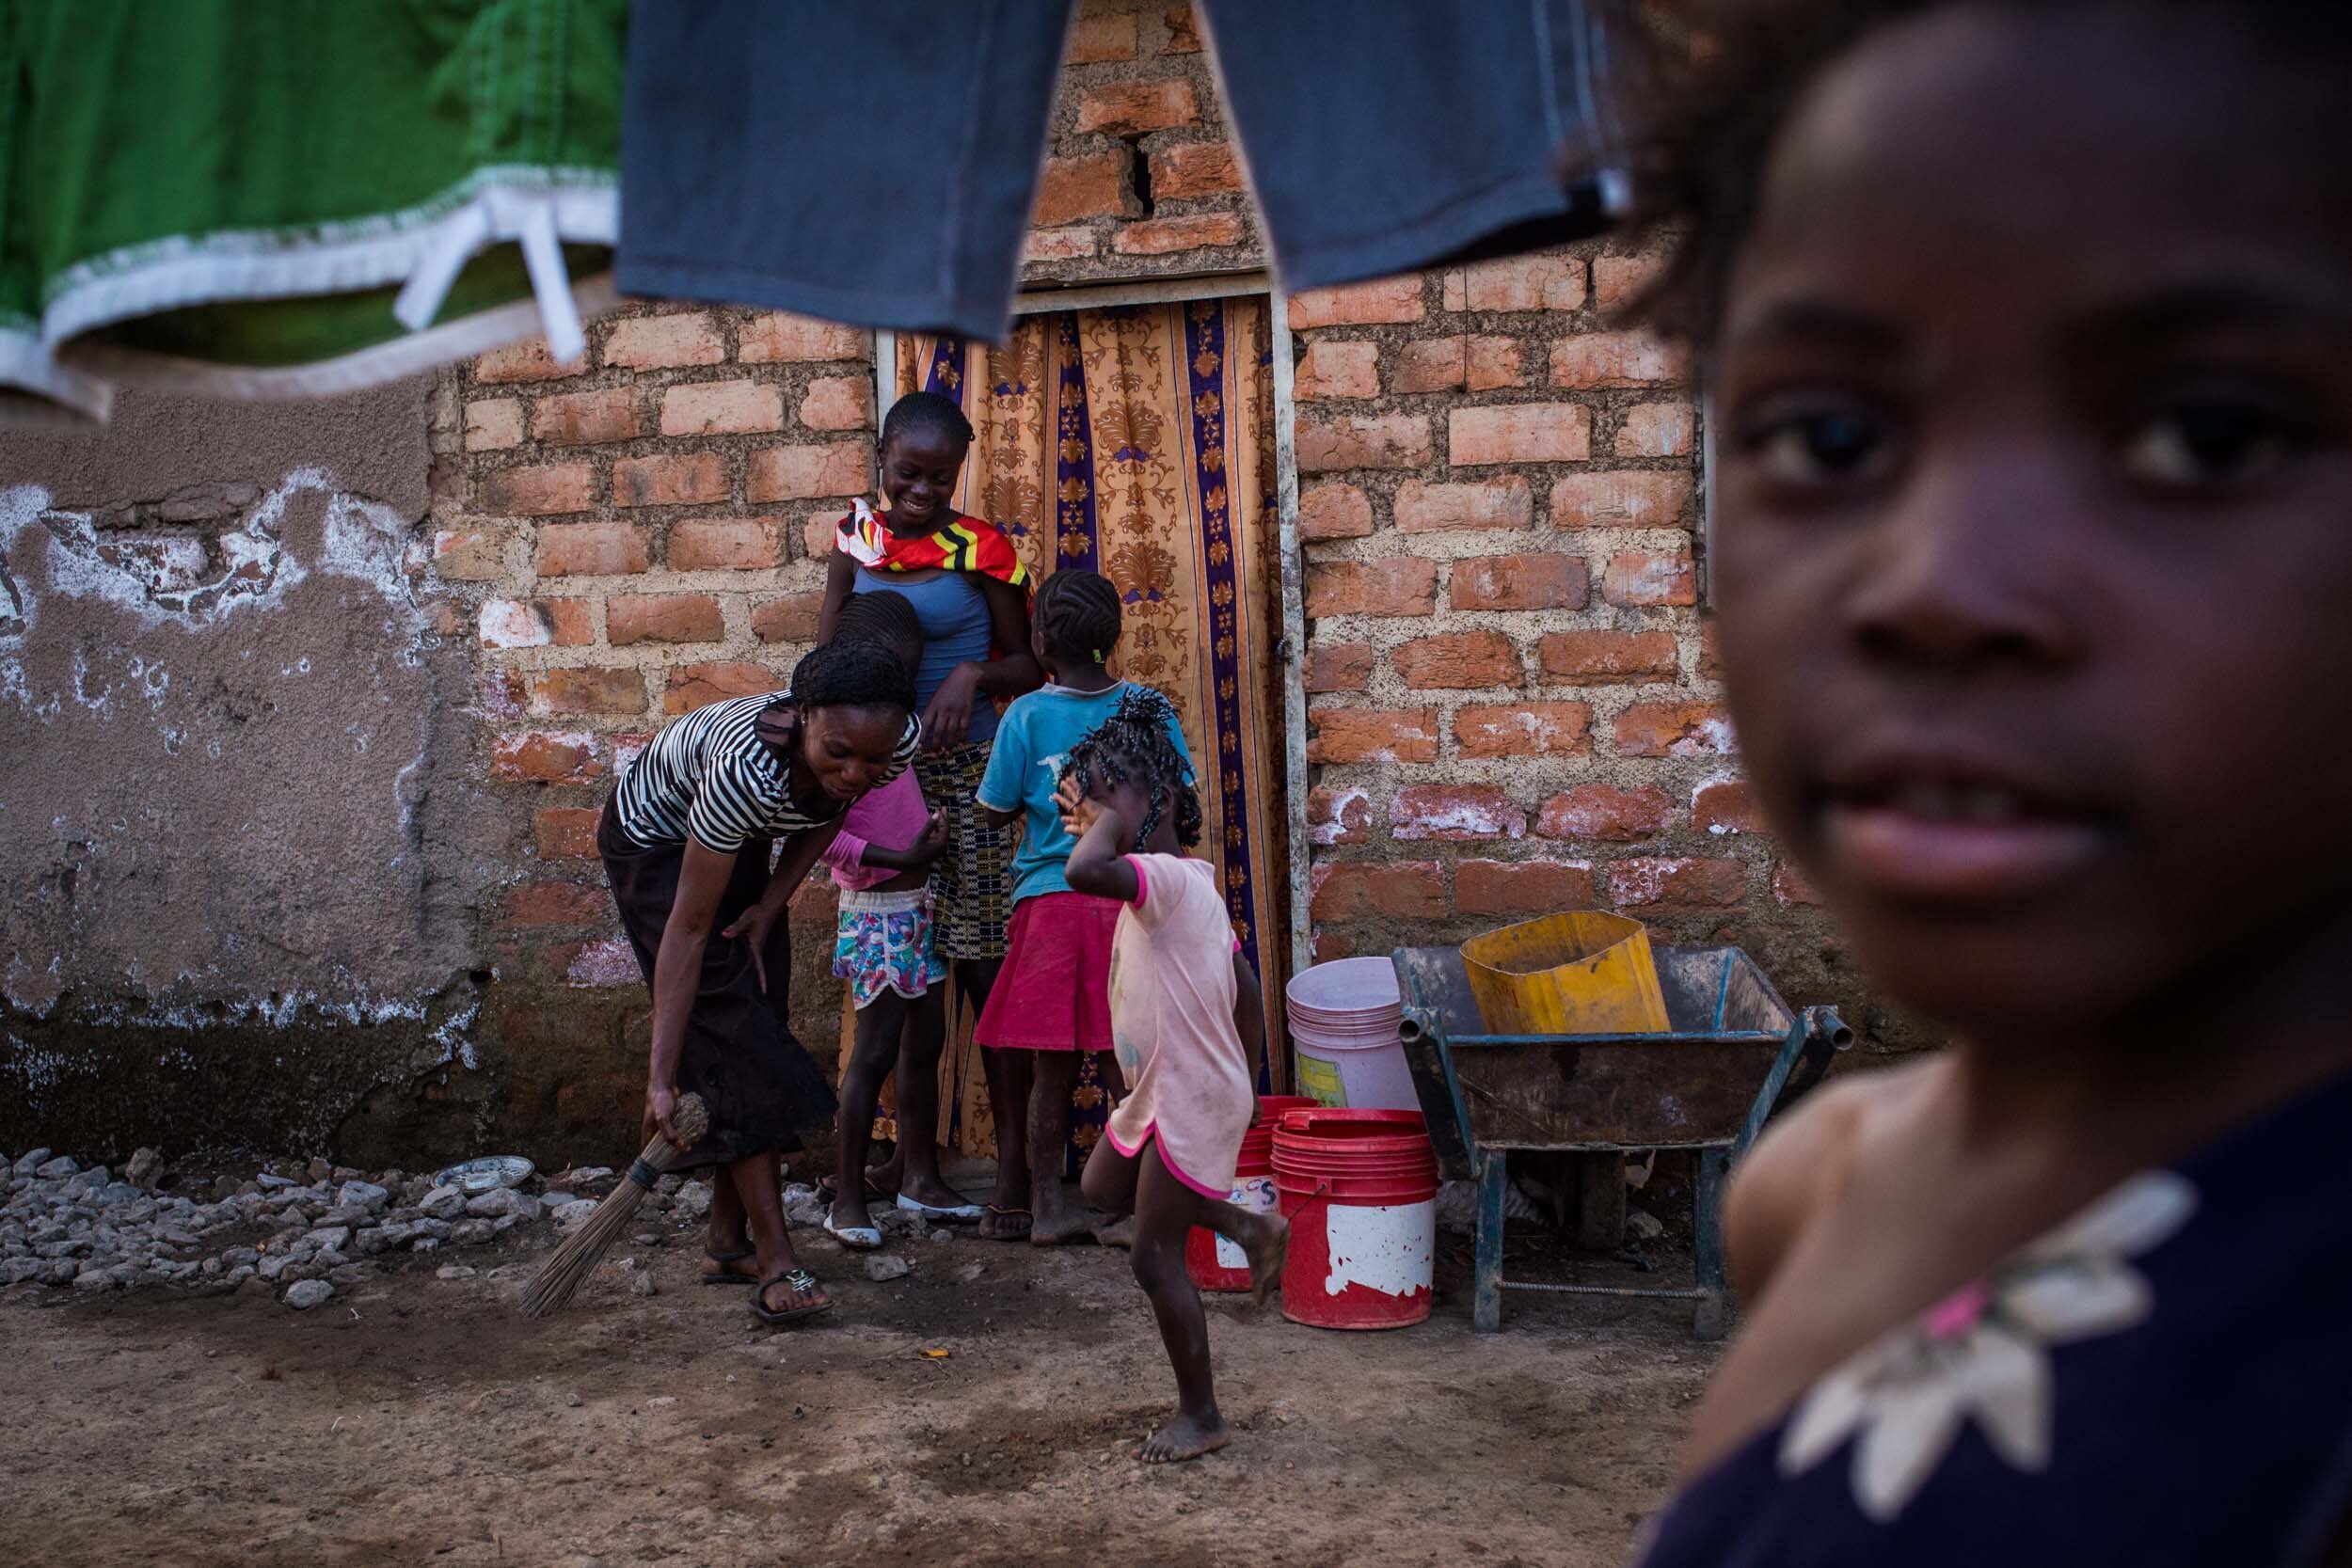  Children play outside of their house in the neighborhood of Tshamilemba, which lies close to the mining company Chemaf. The water and soil in this area are highly contaminated due to the toxic waste of this company. The white salts on the house wall